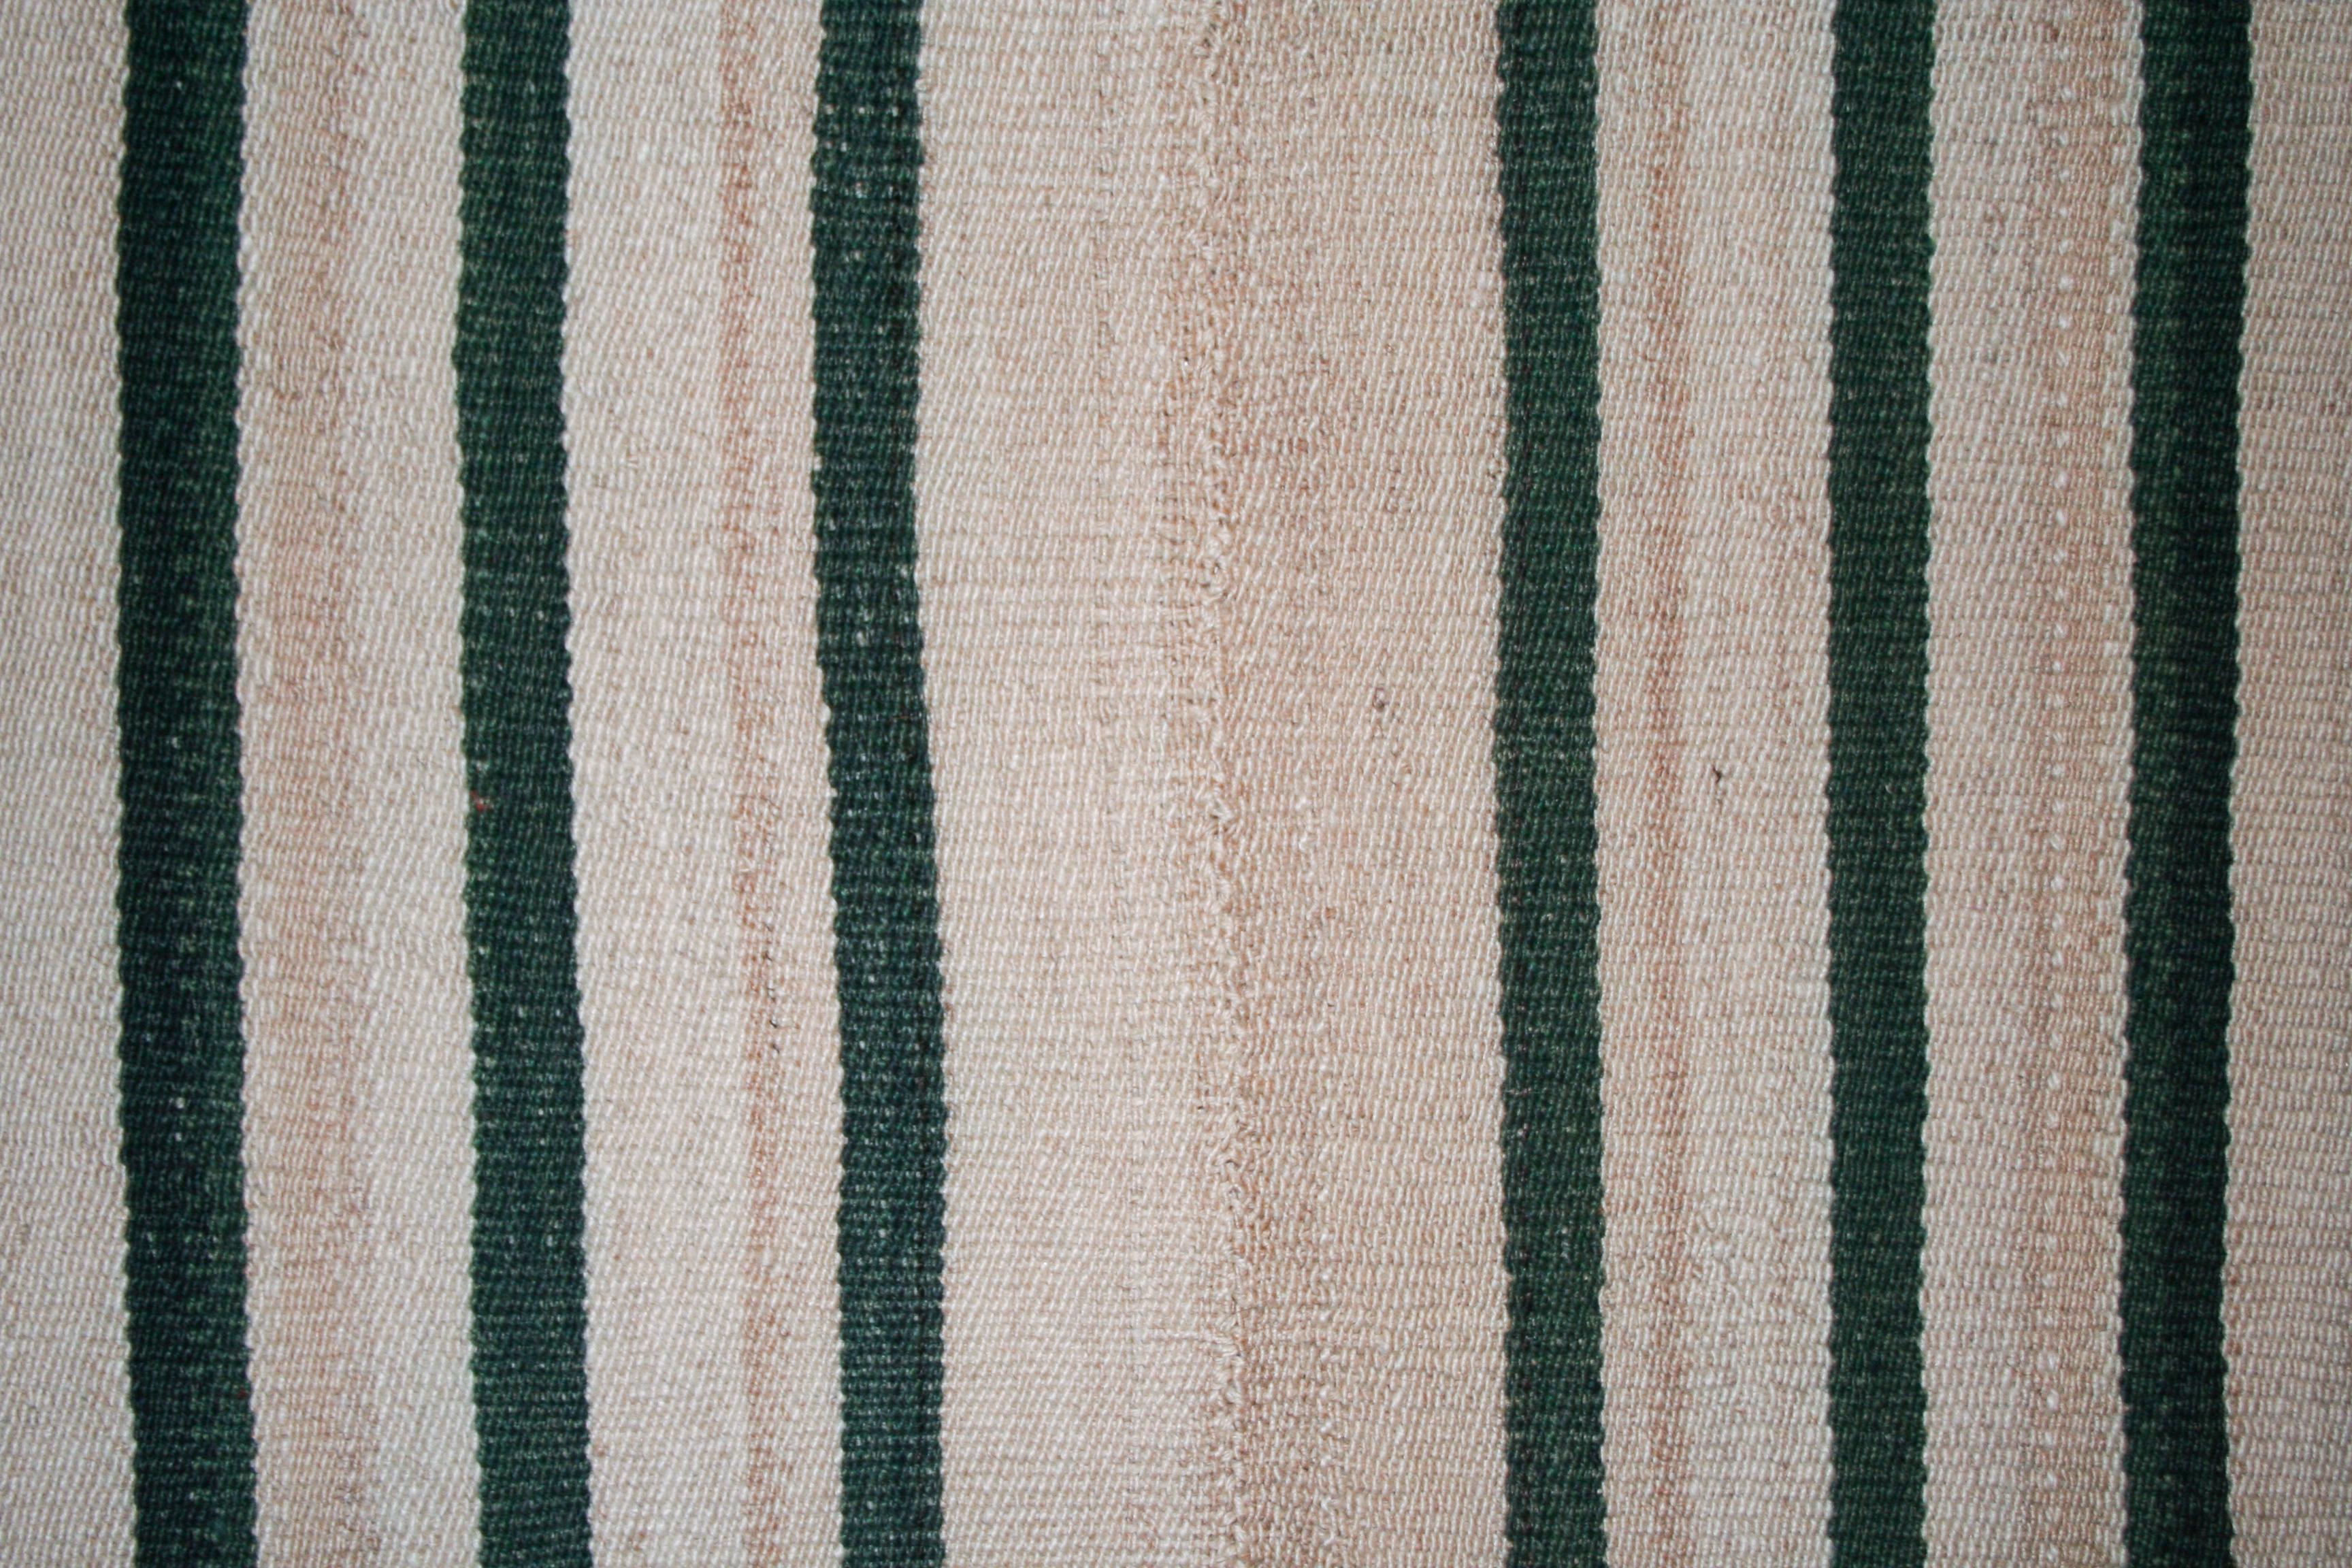 Turkish Antique Minimalist Jajim Flat-Woven Rug with Vertical Ivory and Green Stripes For Sale